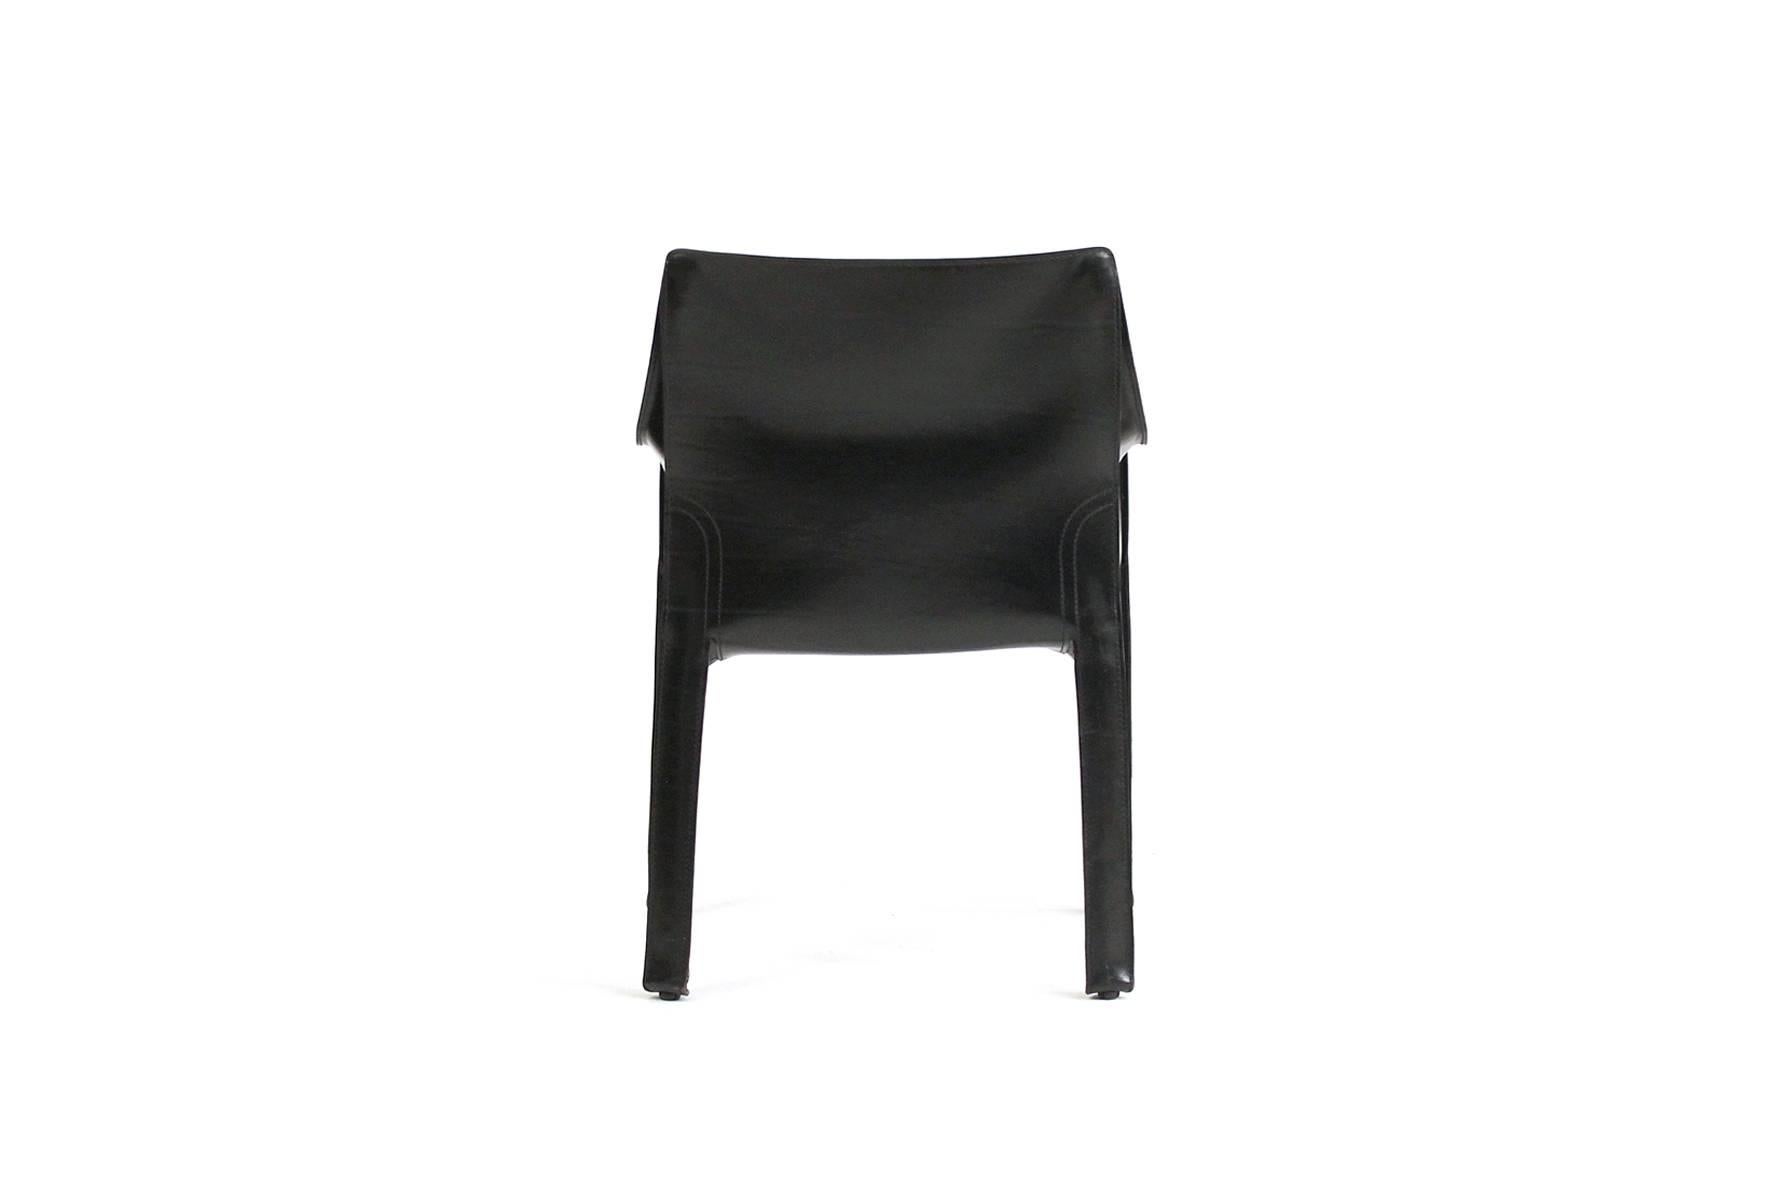 Italian Pair of Black Leather Cab Armchairs by Mario Bellini for Cassina